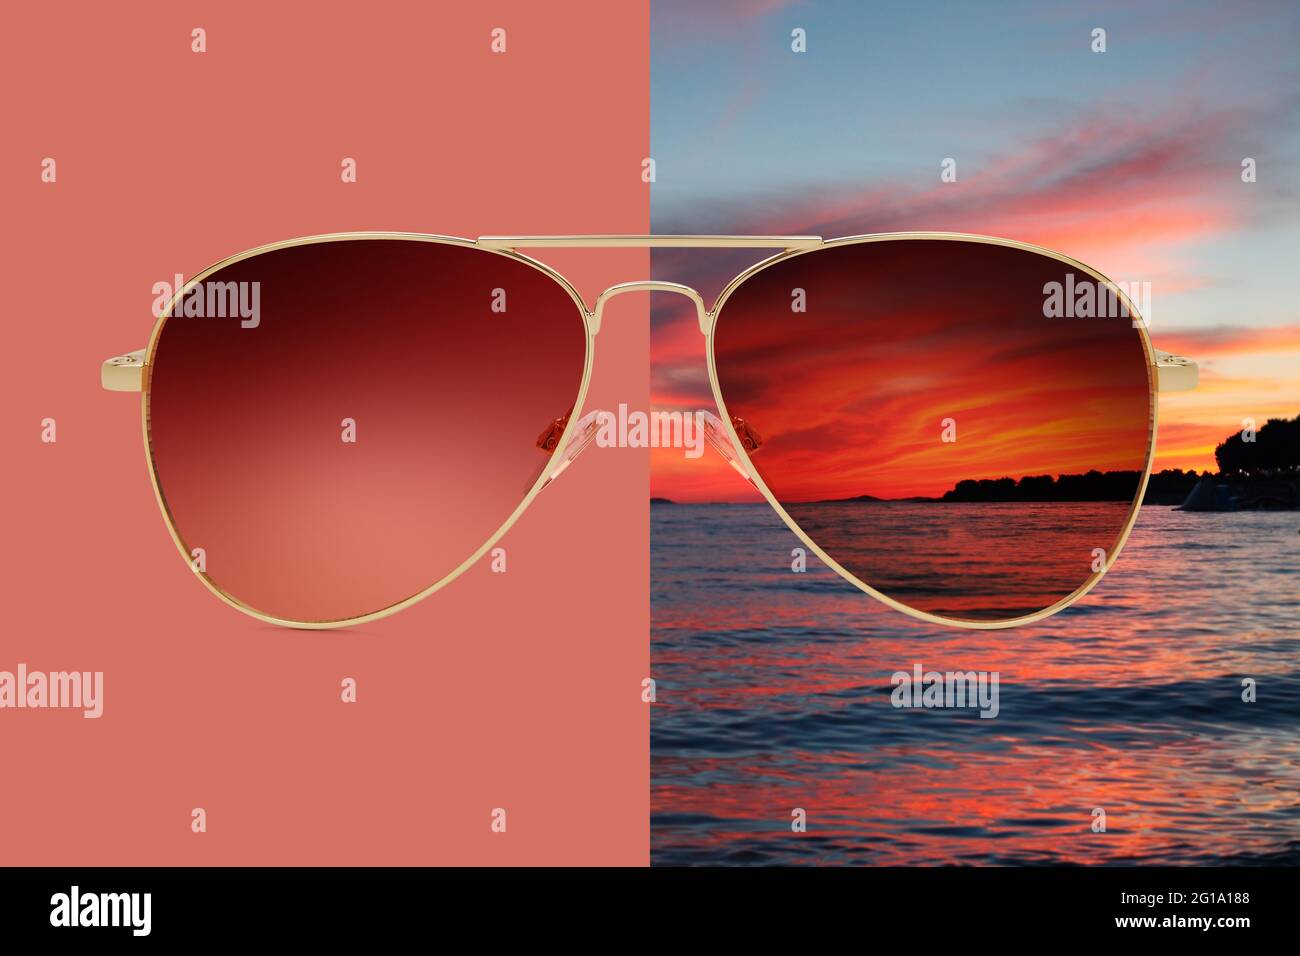 aviator sunglasses isolated on red and summer sunset background with sea and red sky, concept of polarized protective lenses Stock Photo